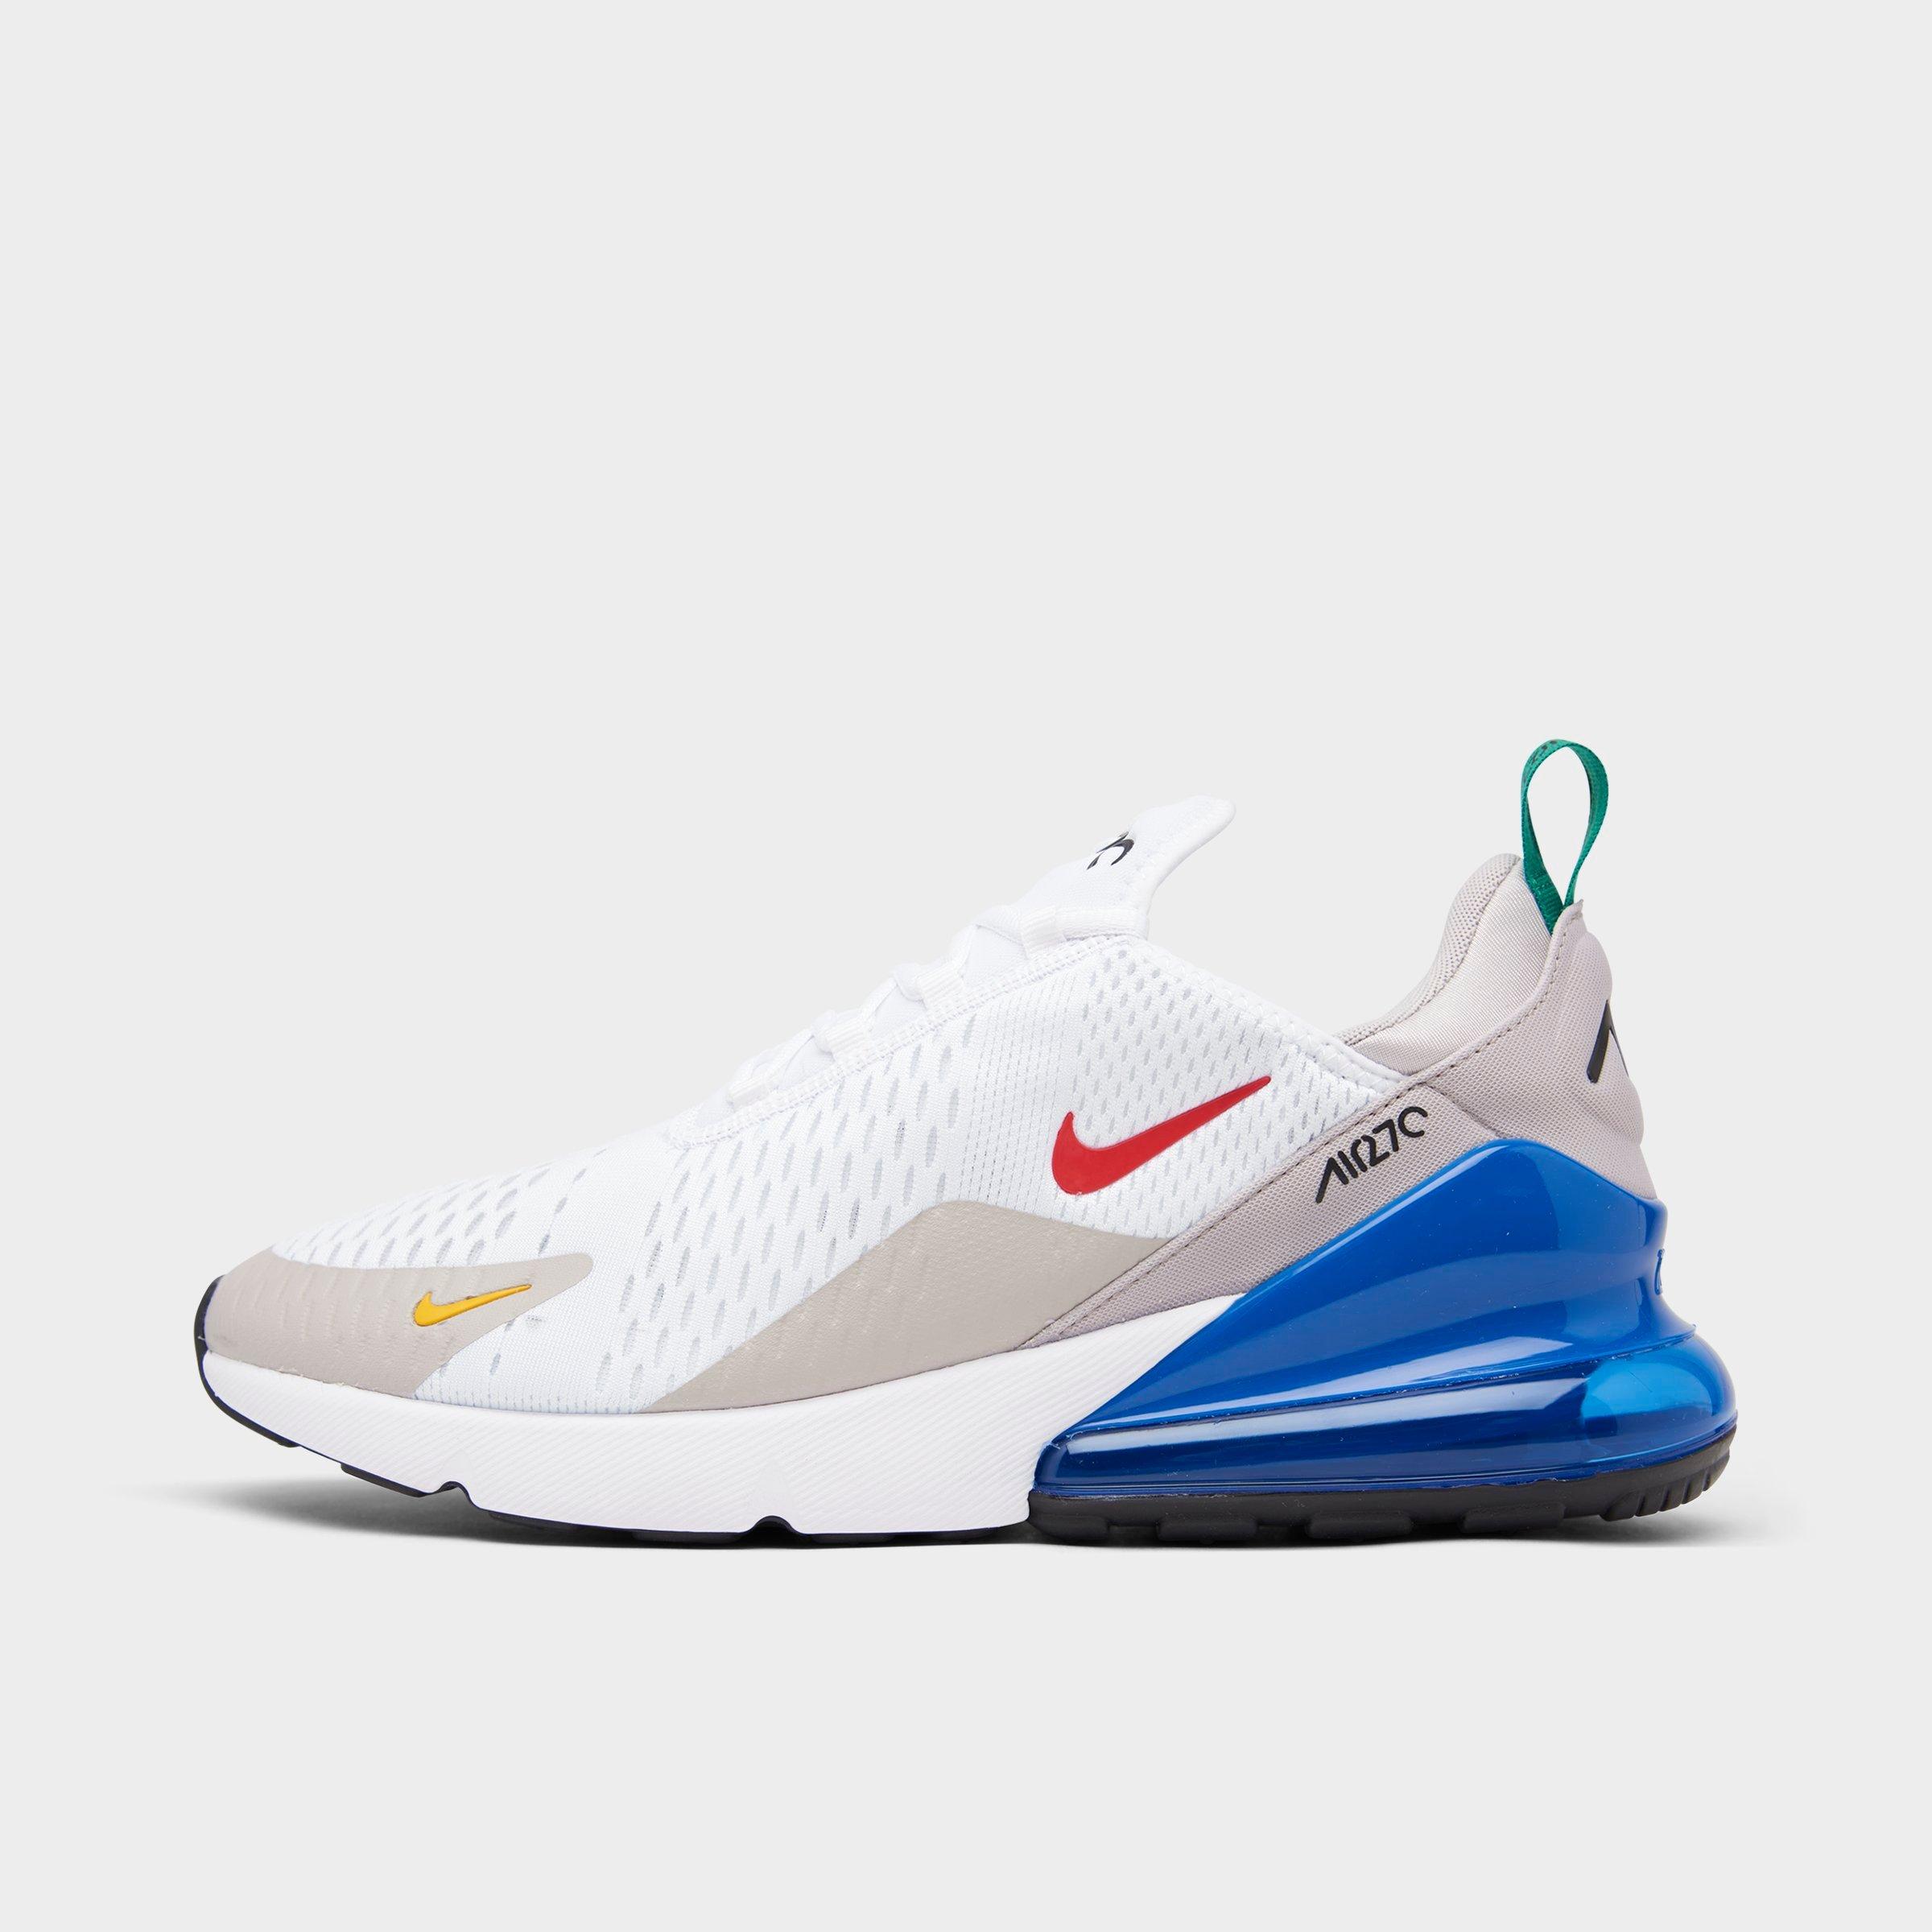 size 14 men's nike air max 270 shoes